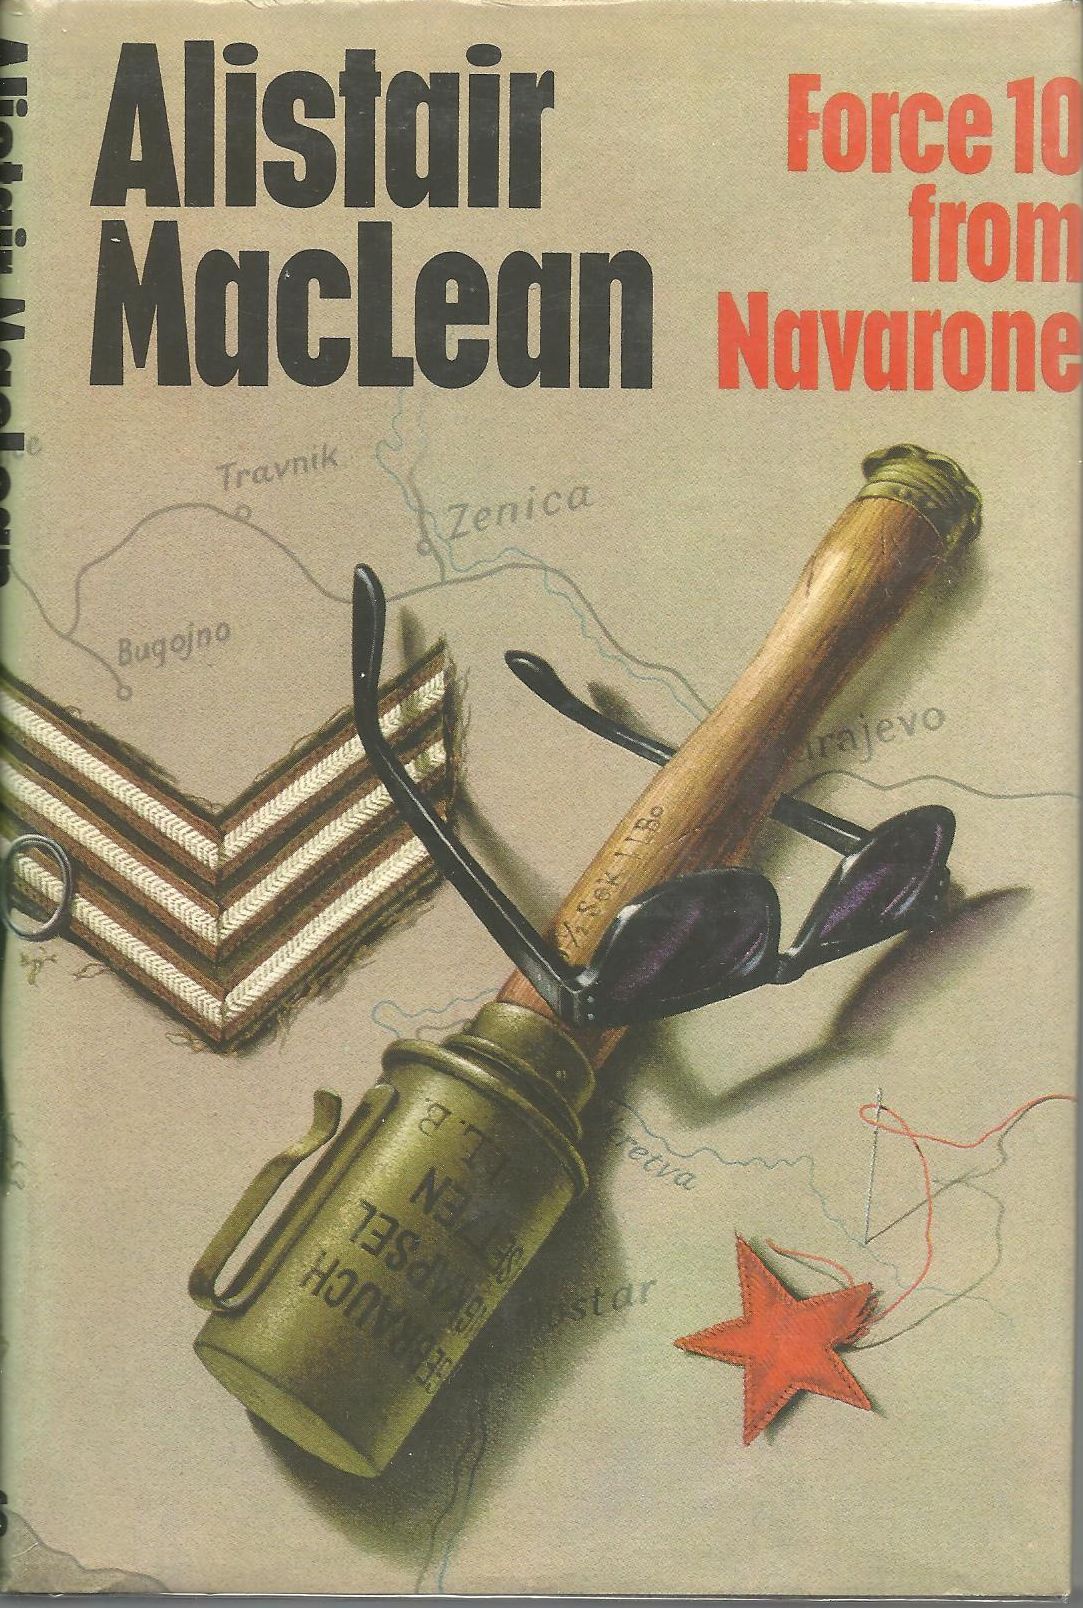 Force 10 from Navarone - UK first edition